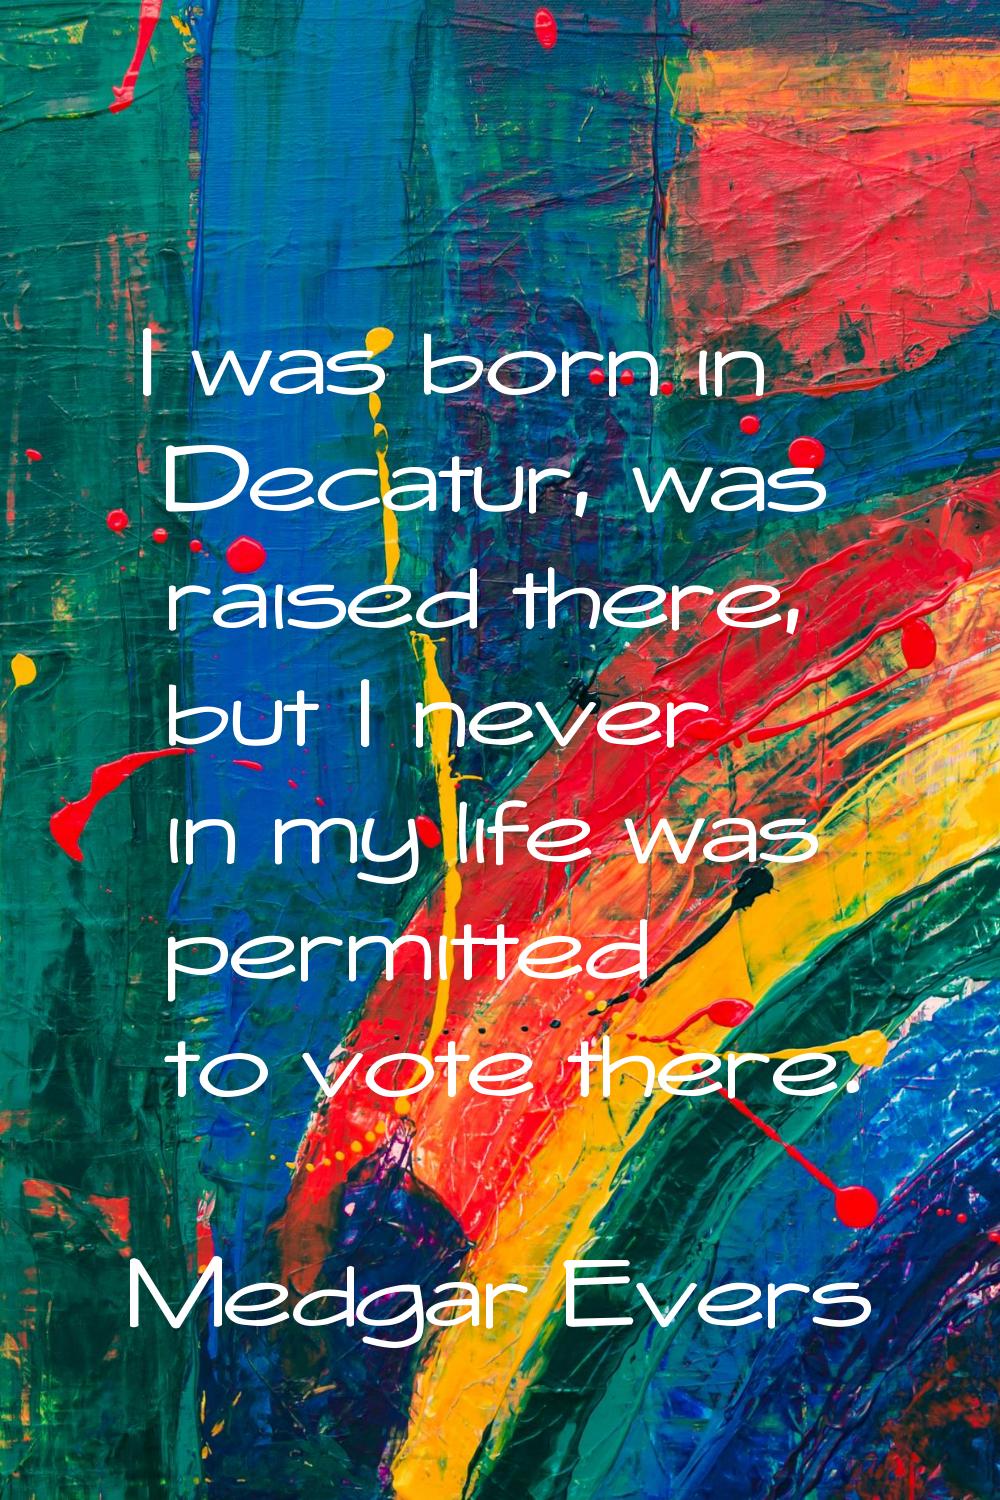 I was born in Decatur, was raised there, but I never in my life was permitted to vote there.